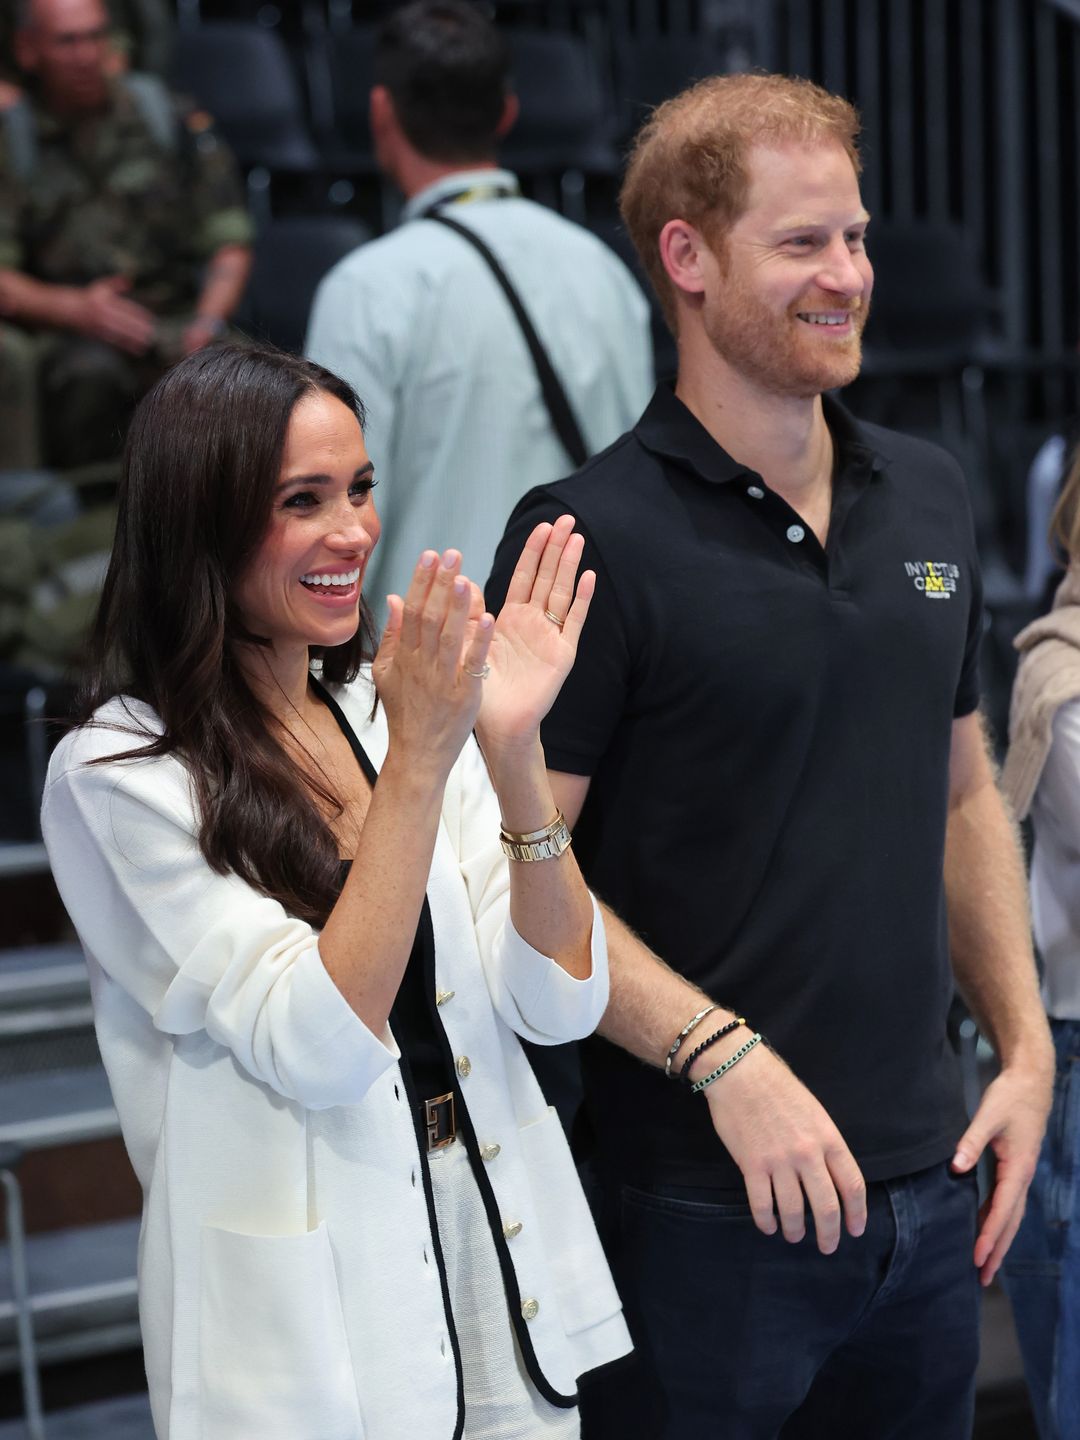 meghan markle clapping